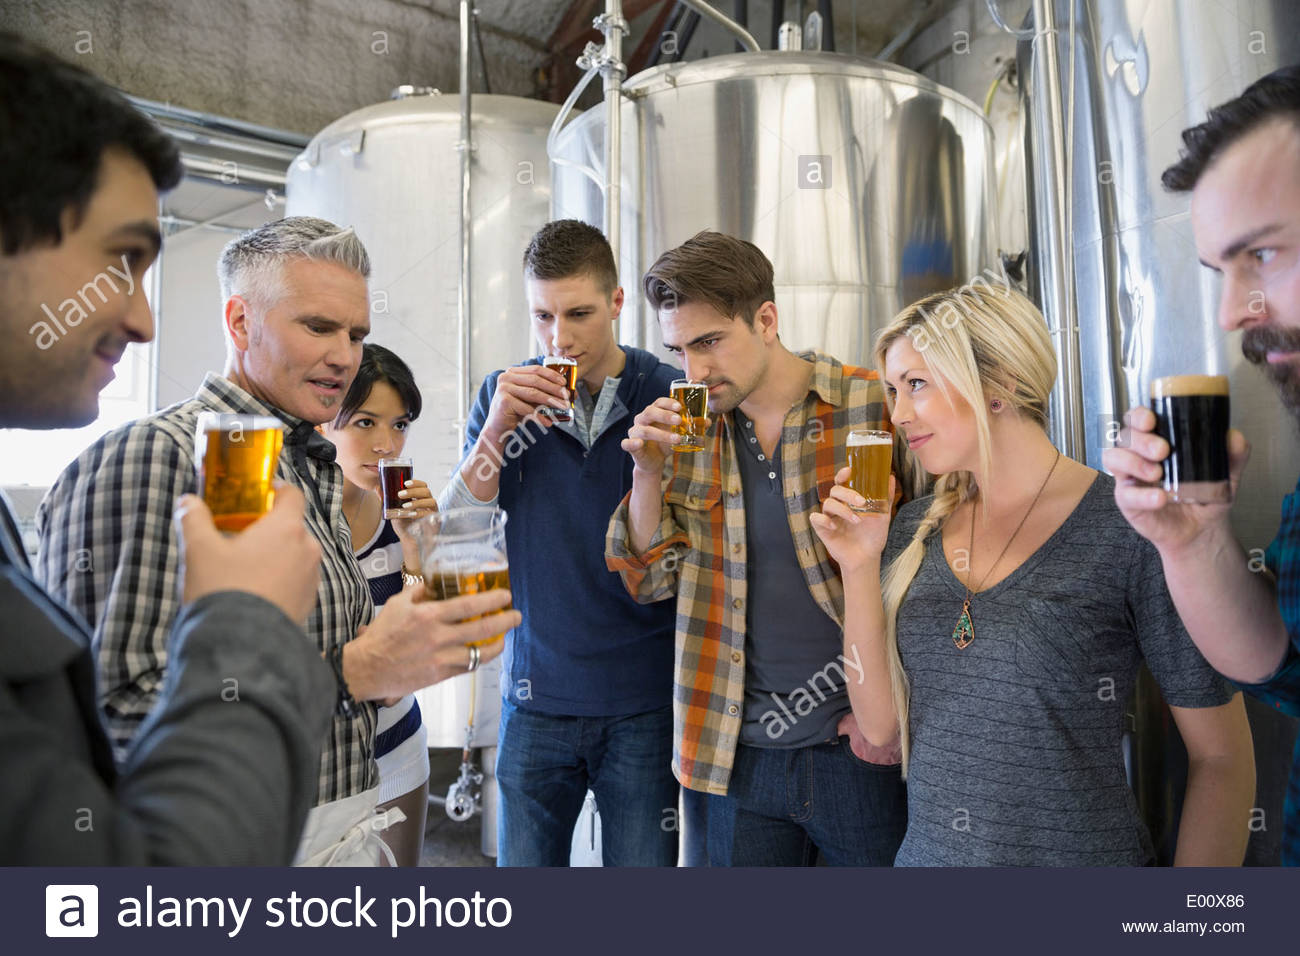 Friends beer tasting at brewery Stock Photo